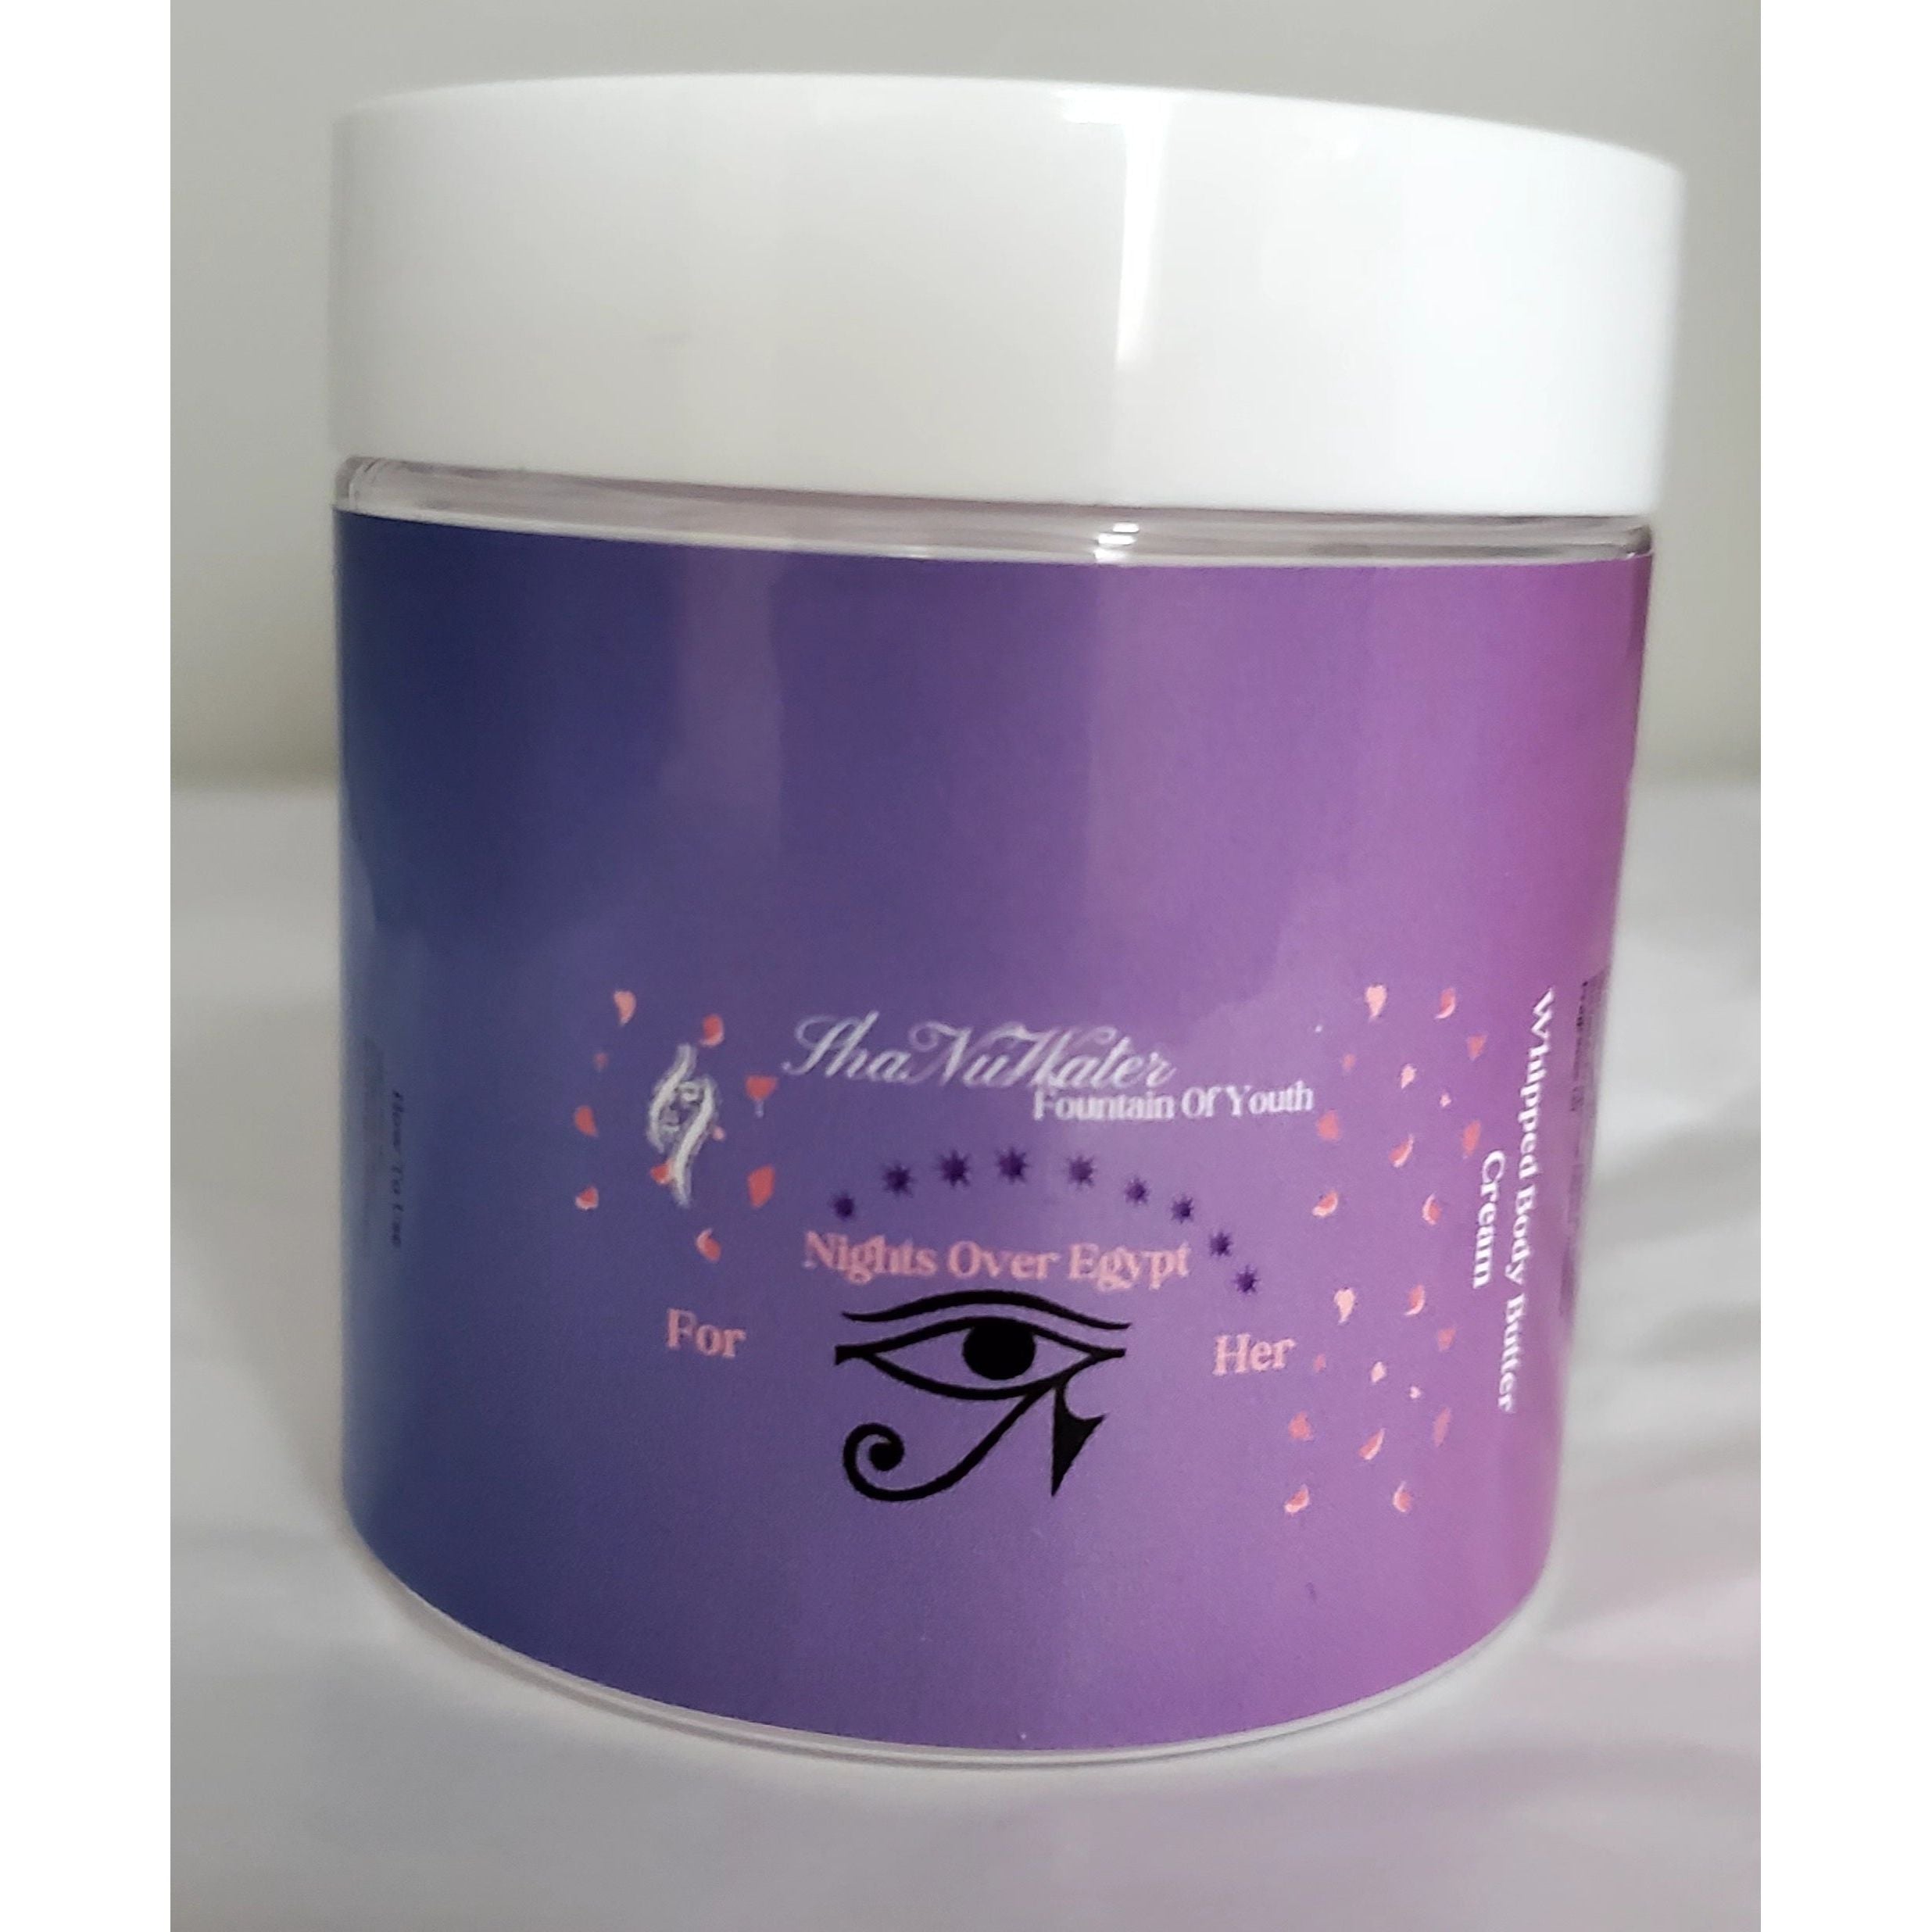 Nights Over Egypt Body Butter For Her